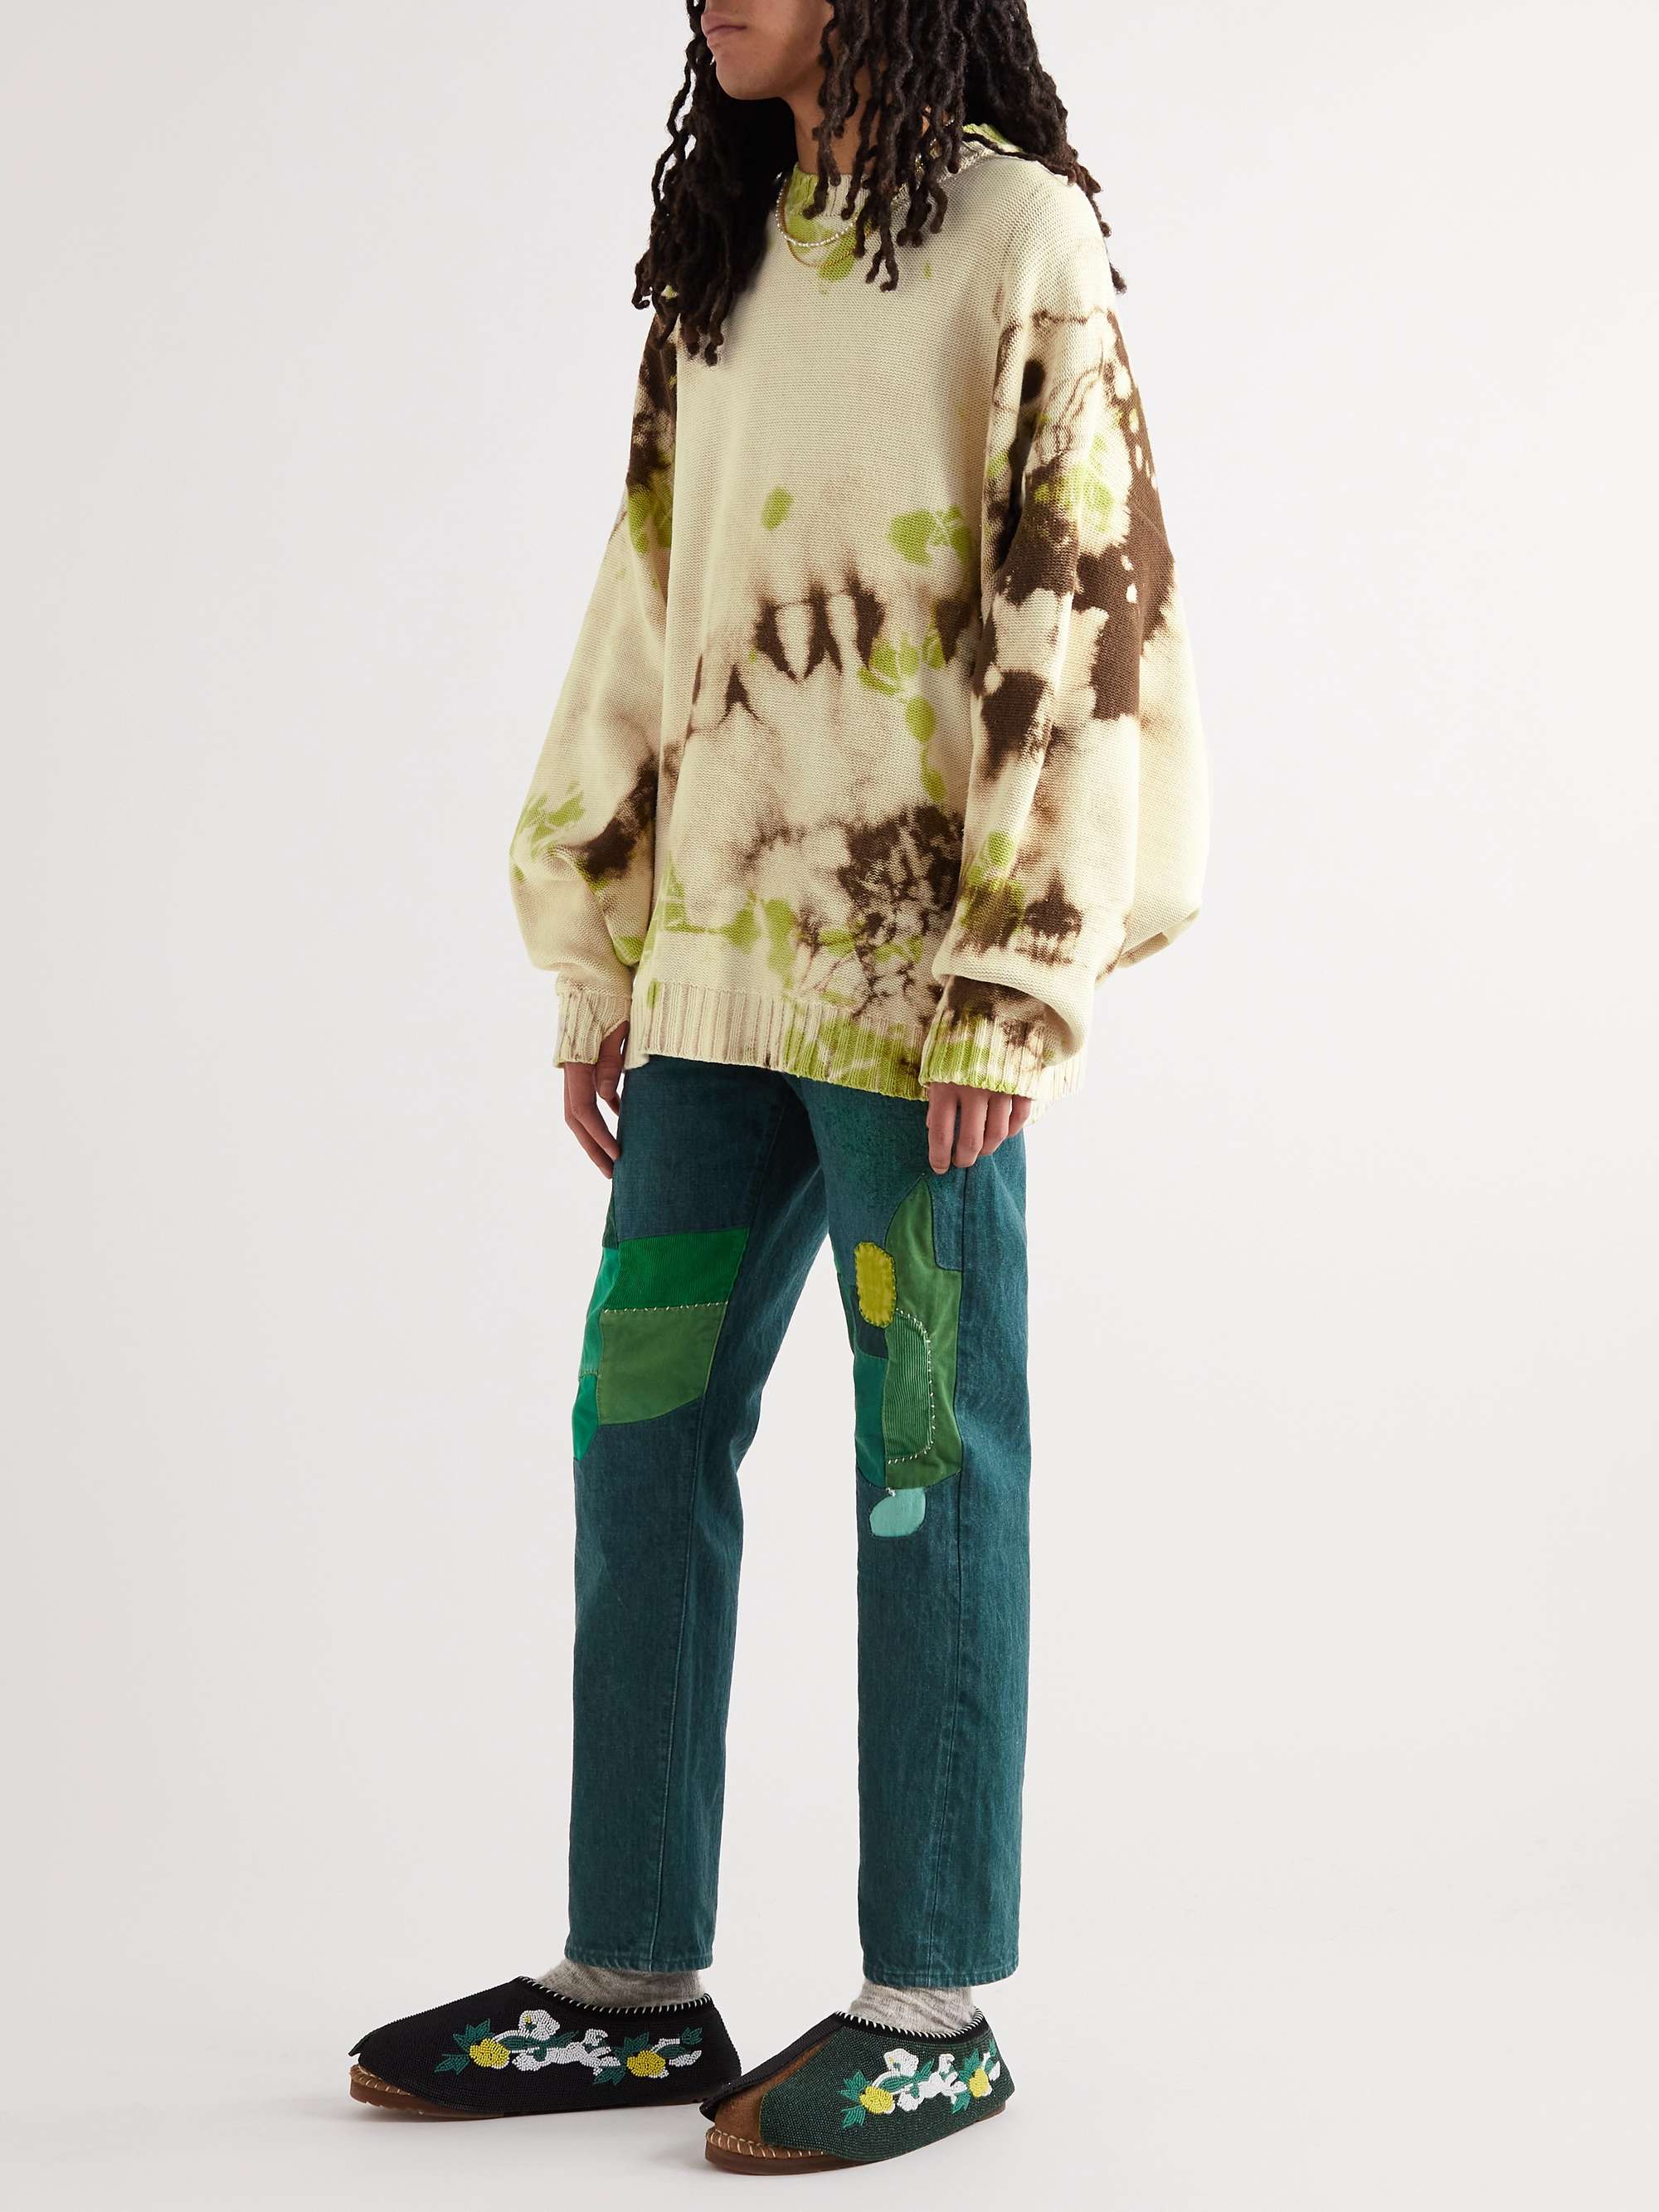 5G Dolman Oversized Tie-Dyed Cotton Sweater